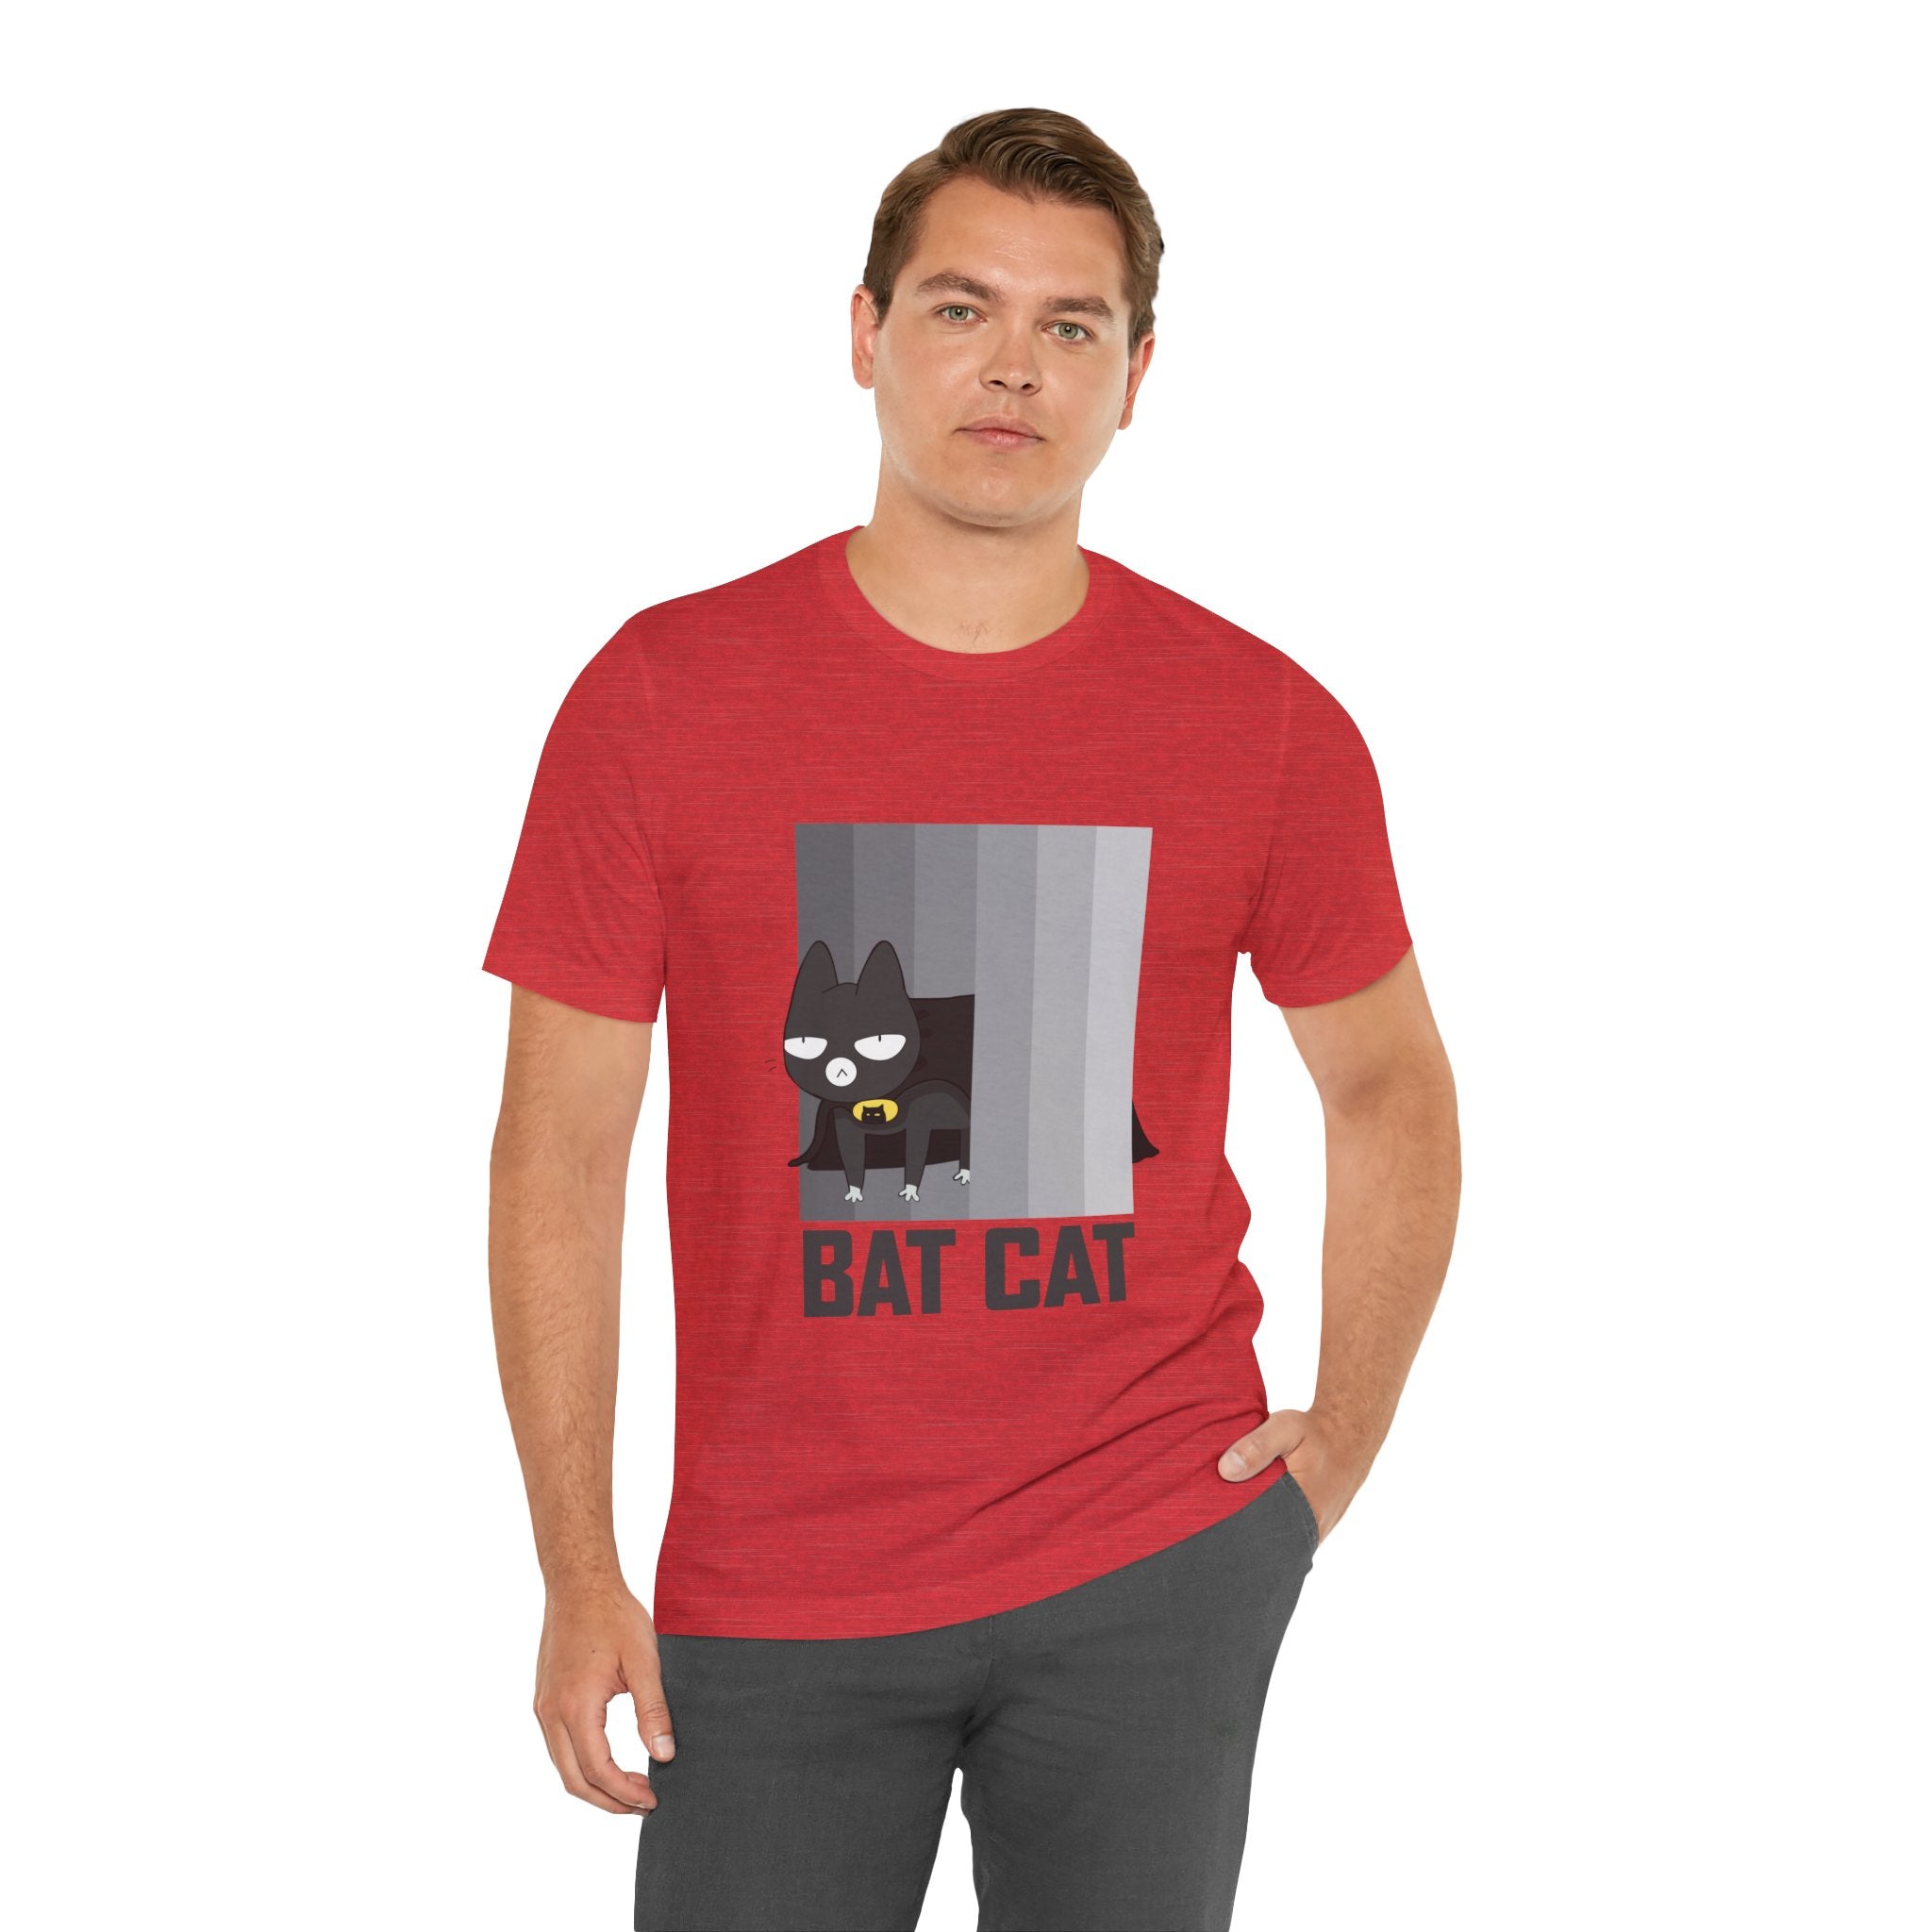 Man in red BATCAT T-Shirt with a "Batcat" graphic design, standing against a white background.